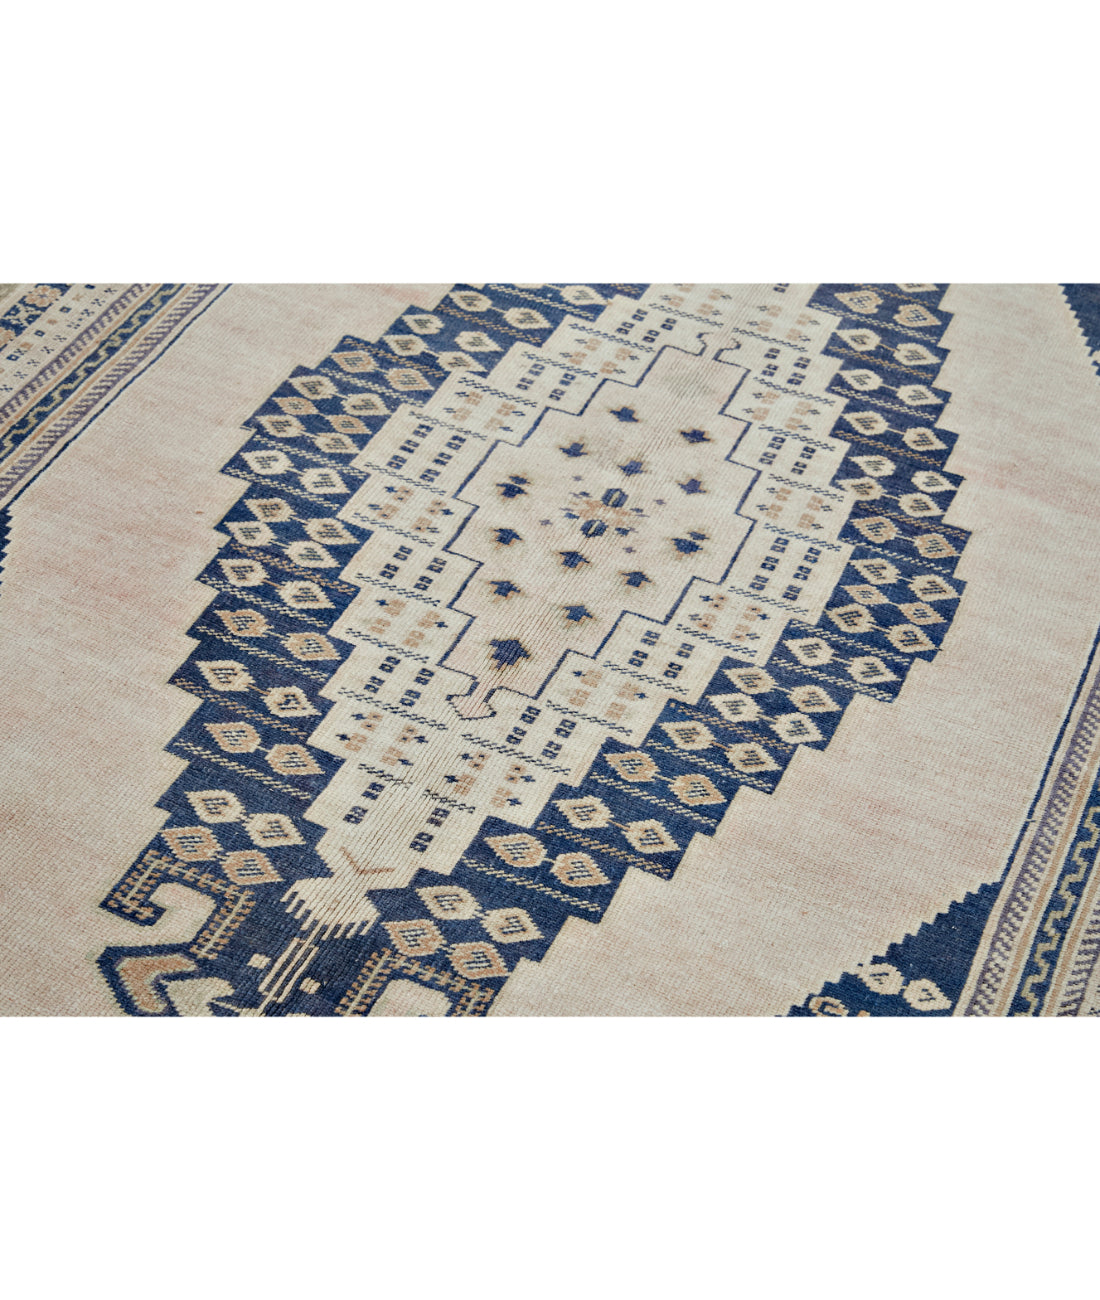 Hand Knotted Turkey Taspinar Wool Rug 5'5" x 9'6" 5' 5" X 9' 6" (165 X 290) / Ivory / Blue